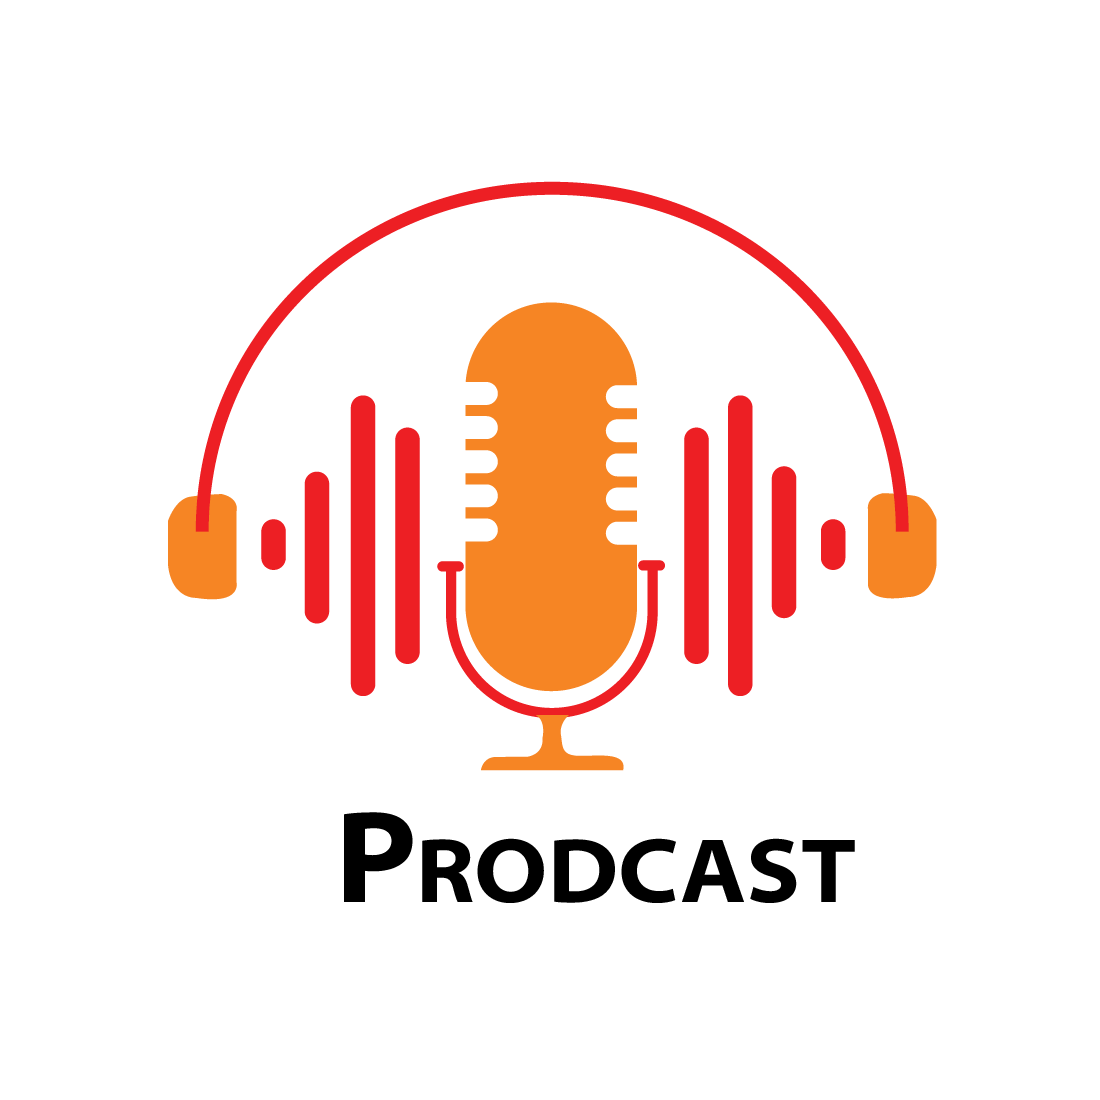 Prodcast logo in vector form cover image.